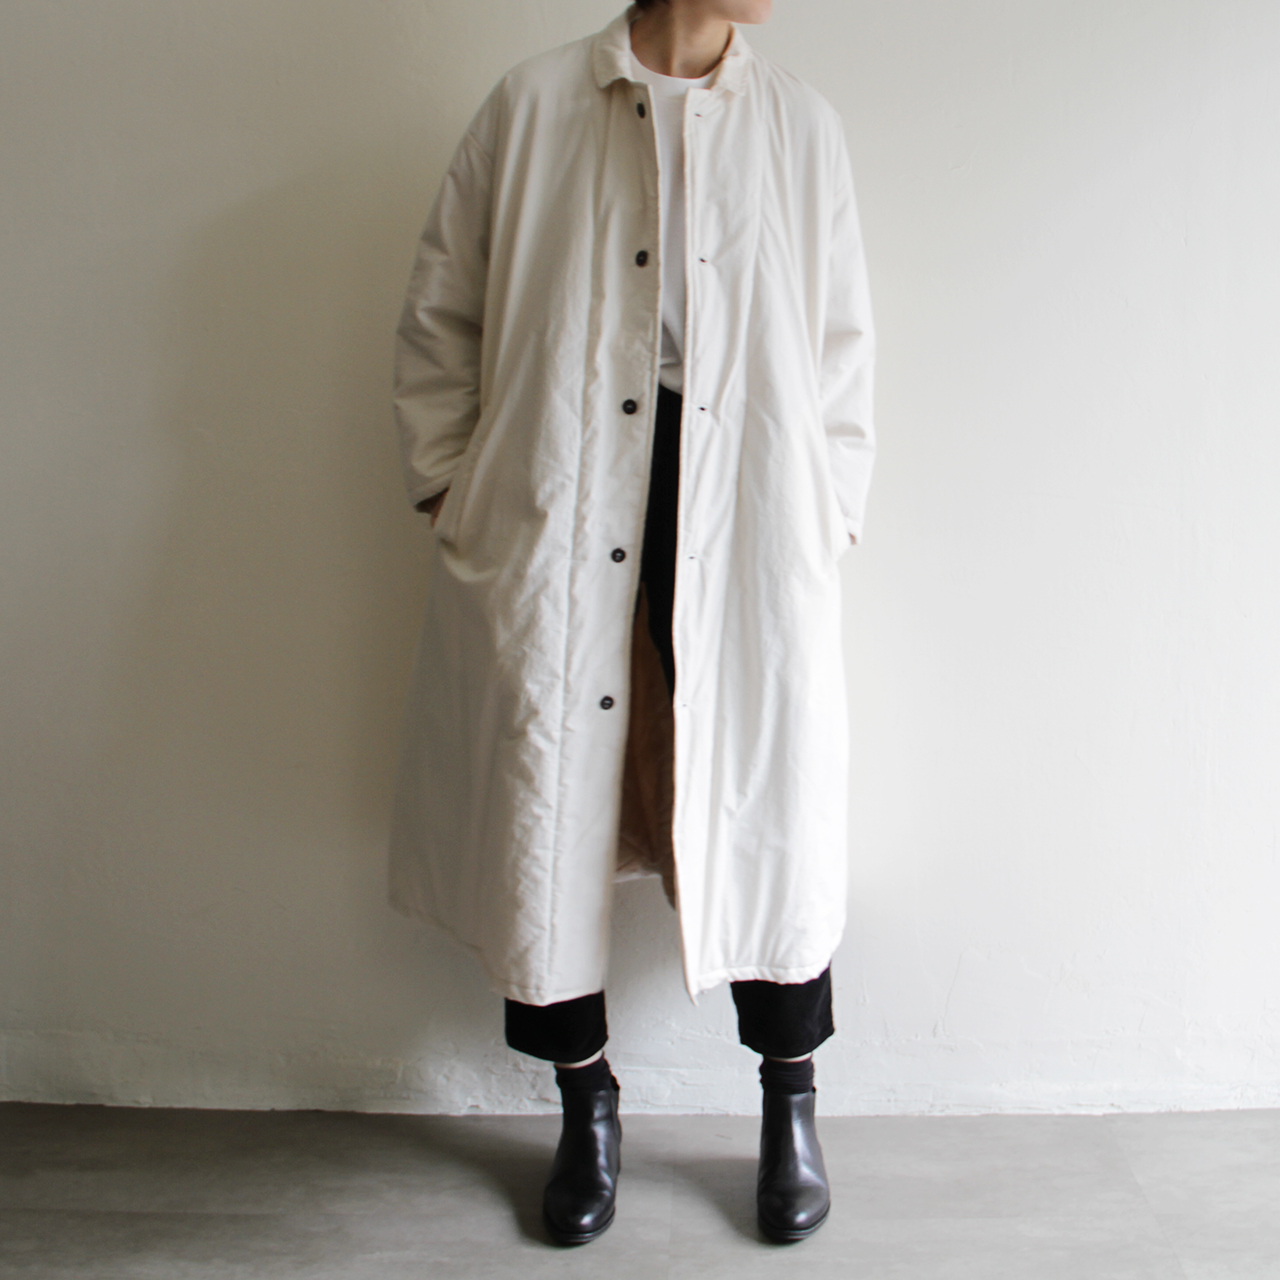 Yarmo quilt lined coat